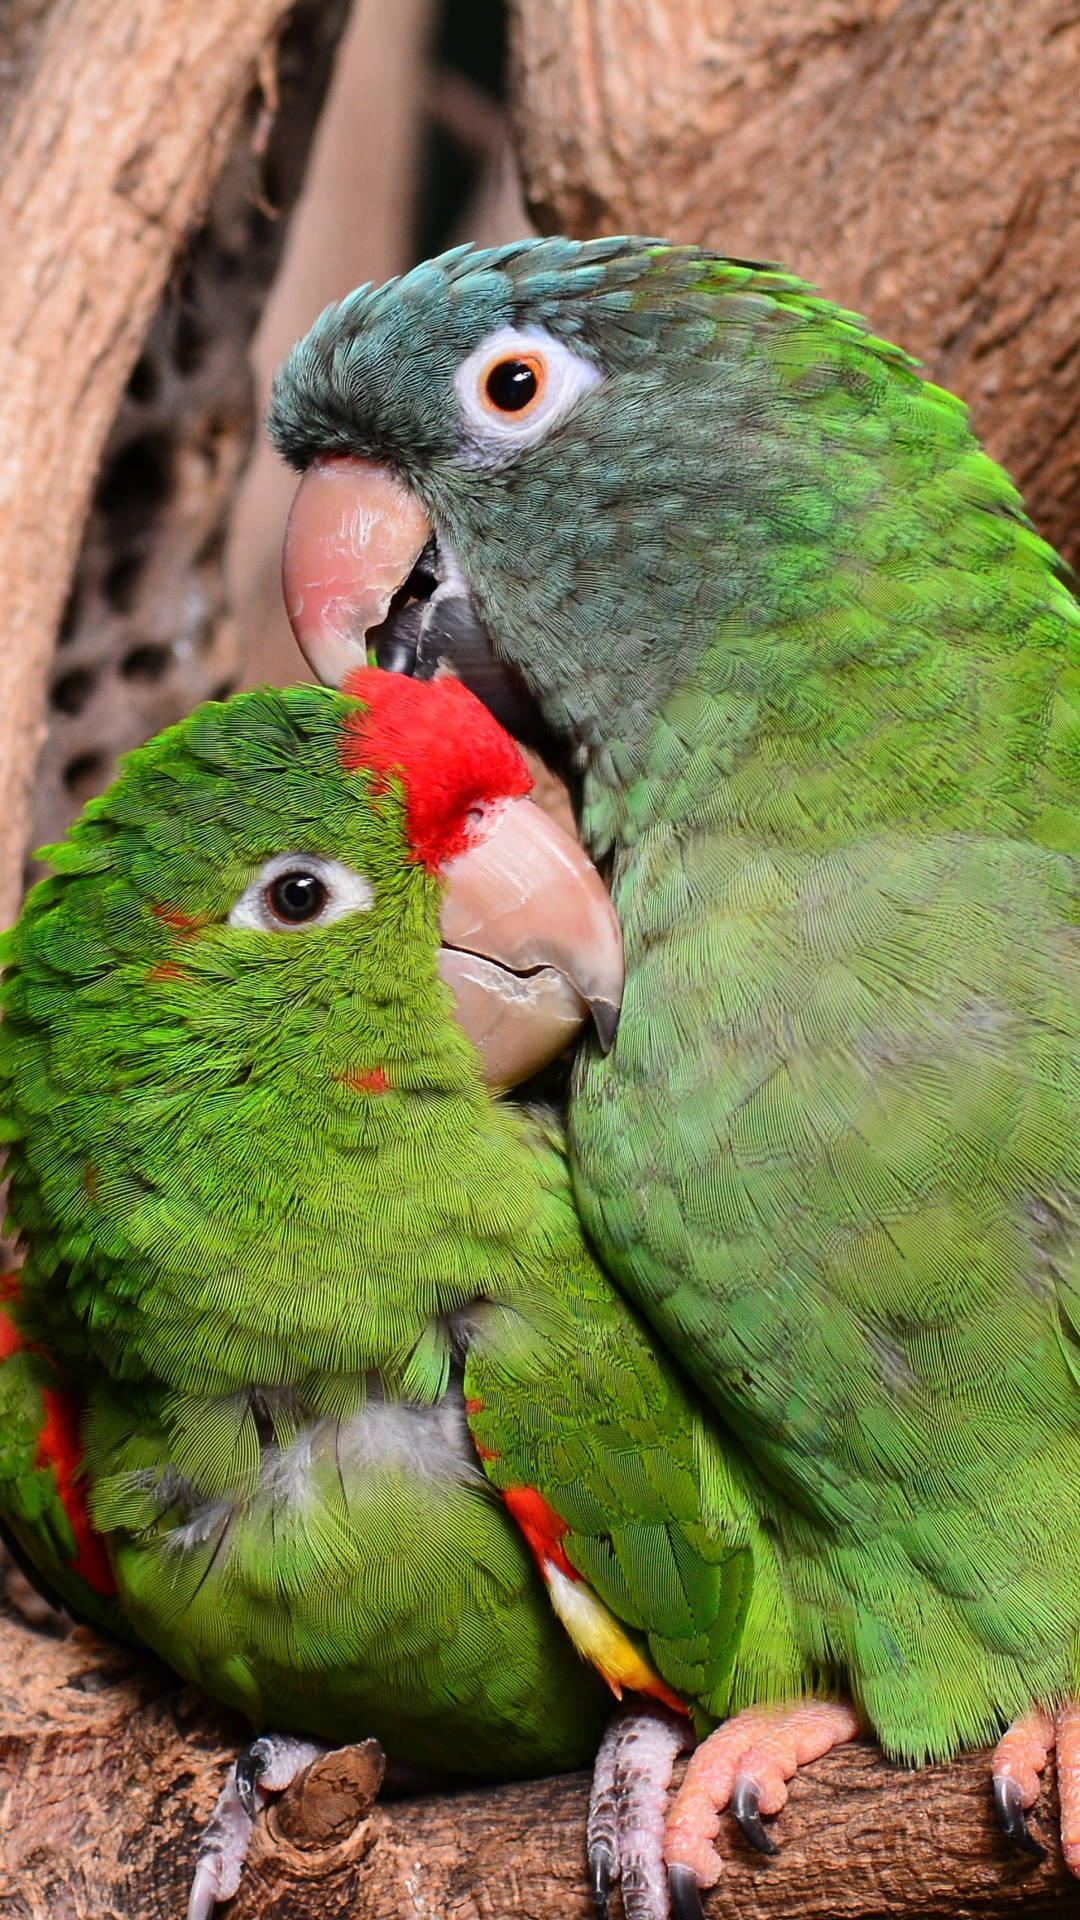 Free Parrot Wallpaper Downloads, [100+] Parrot Wallpapers for FREE |  